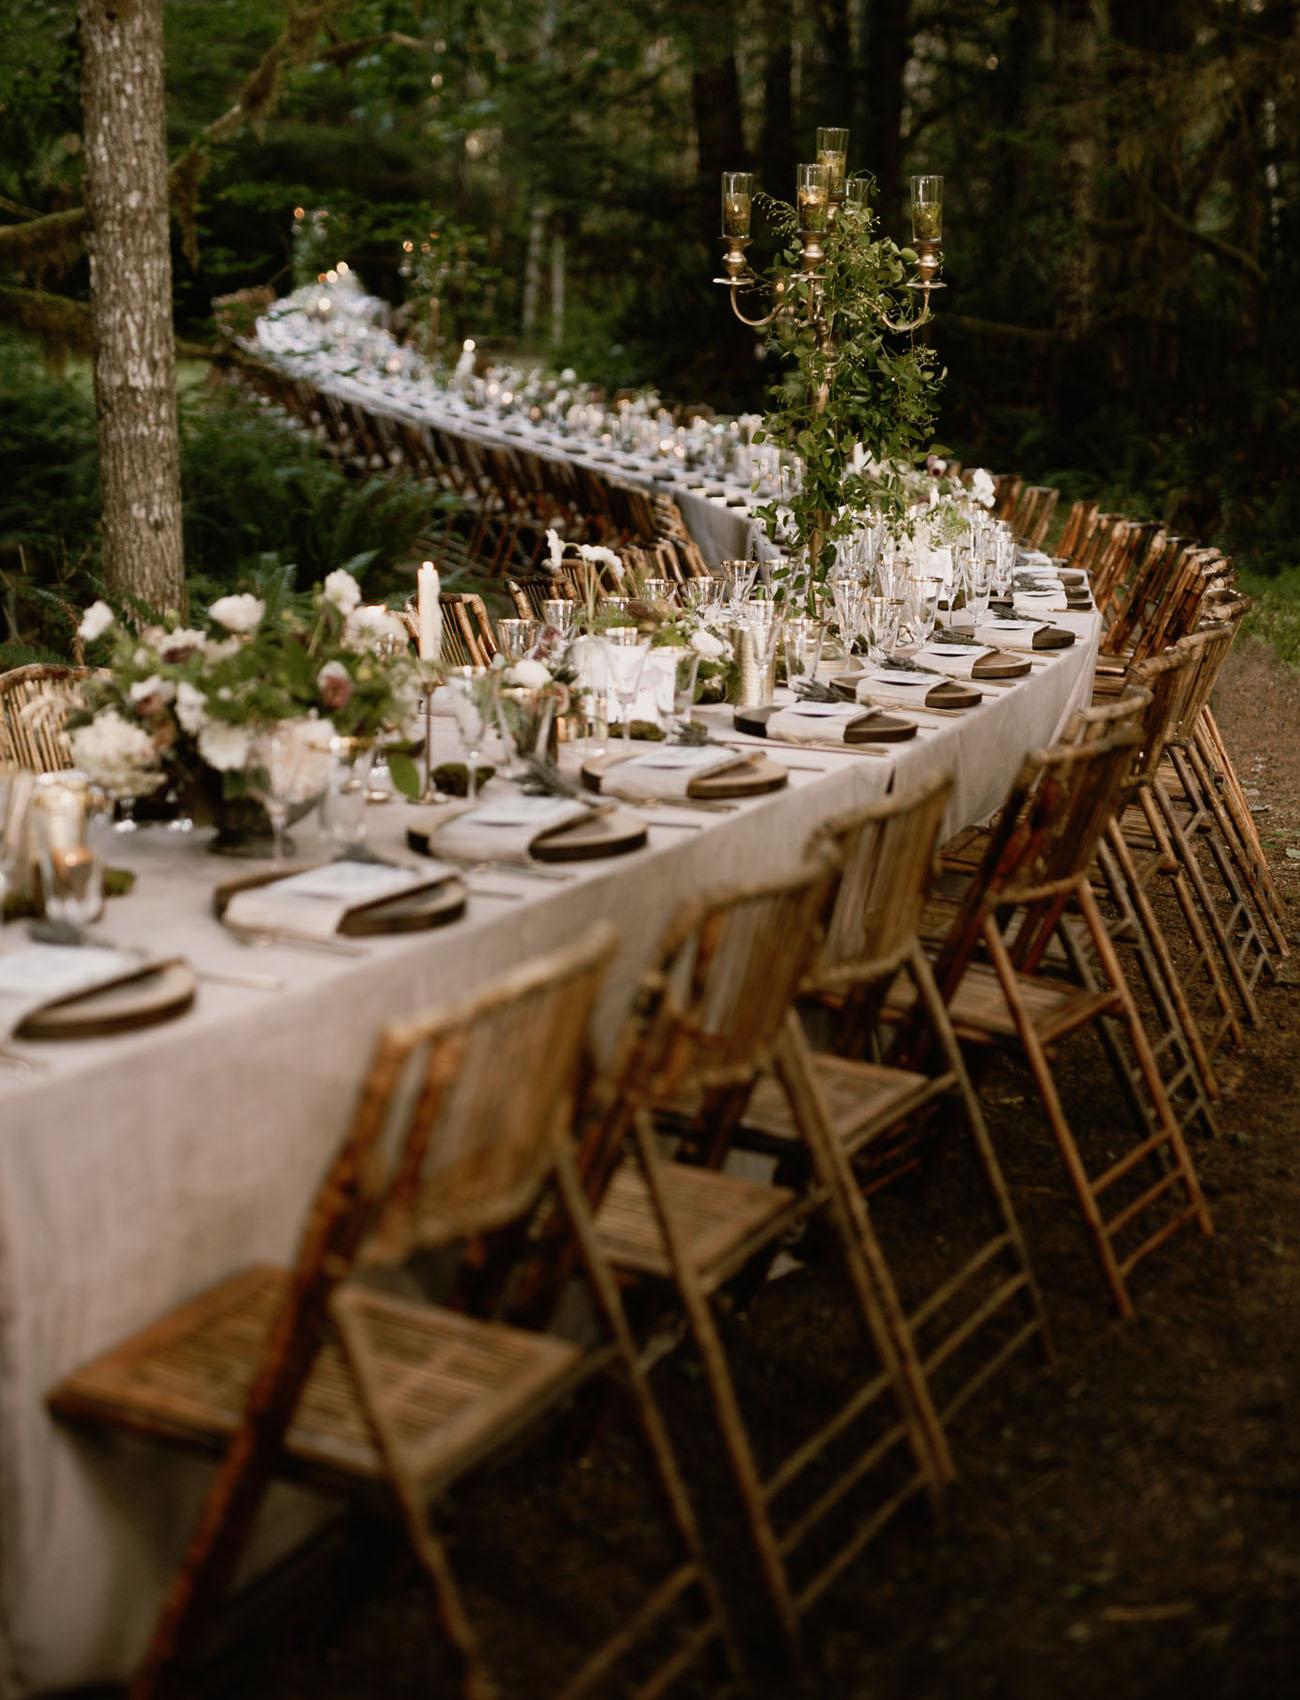 Magical Forest Wedding Venues You'll Want to Get Lost In